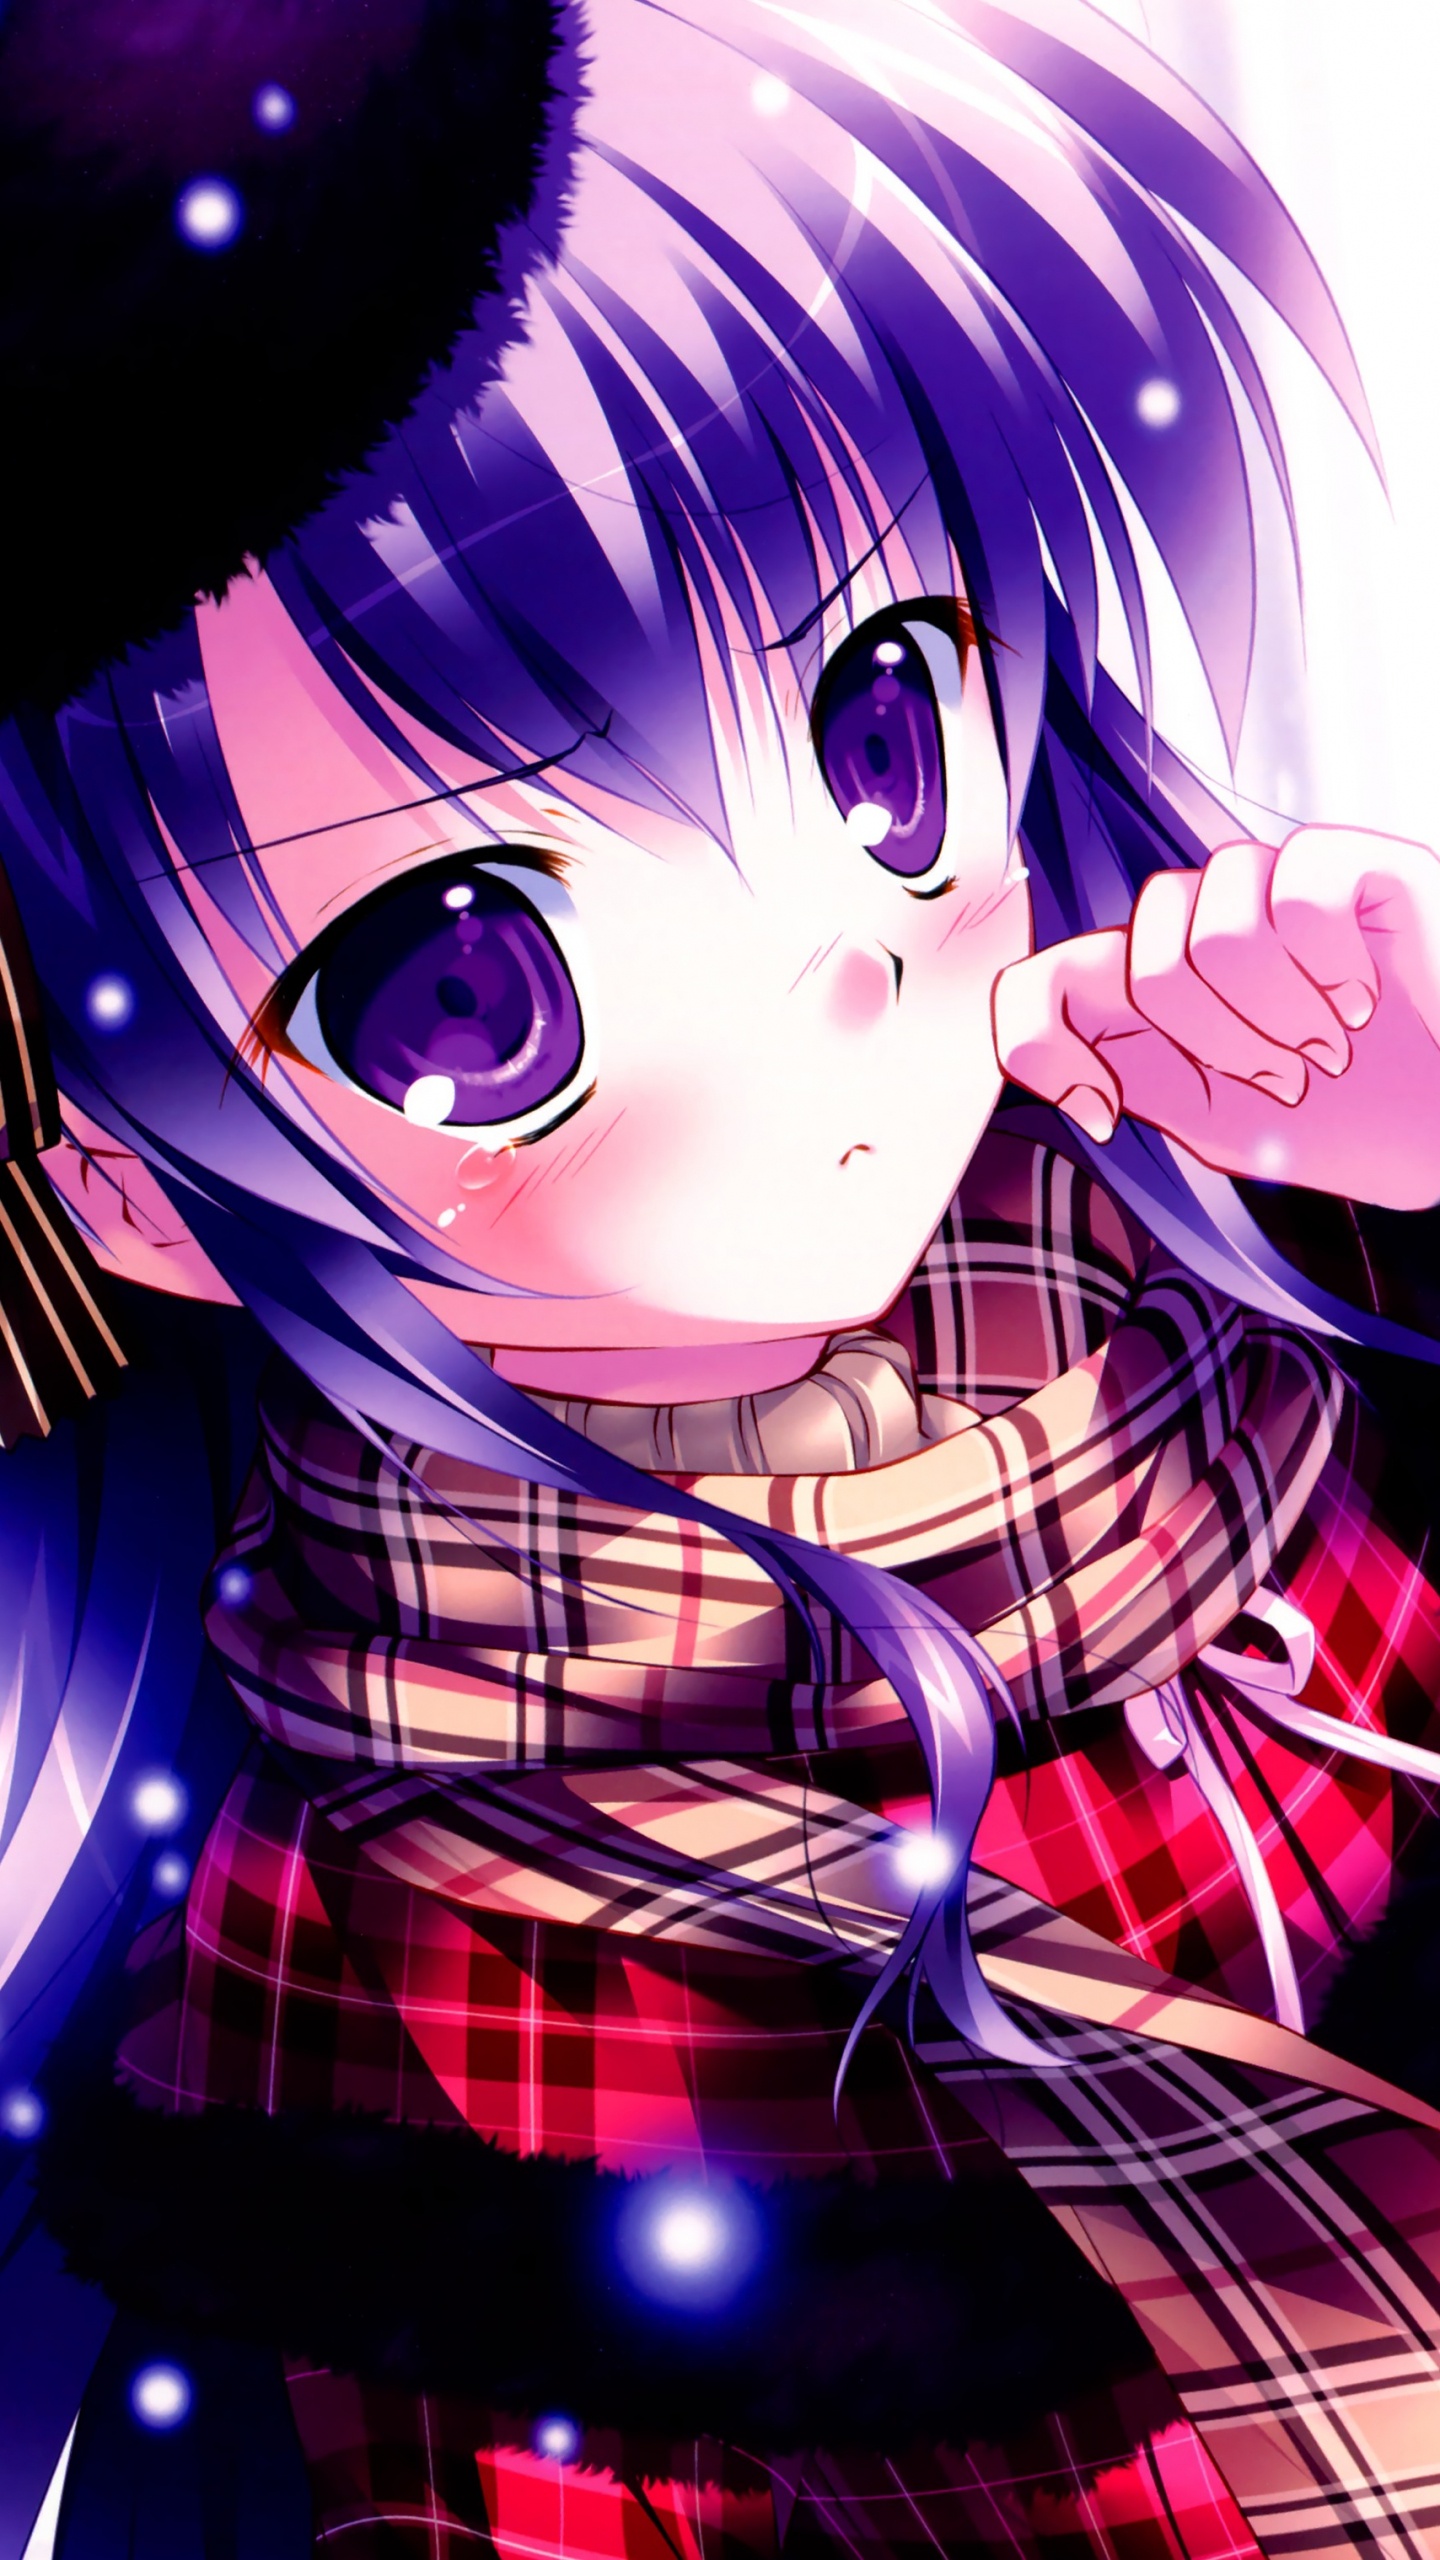 Purple Haired Girl Anime Character. Wallpaper in 1440x2560 Resolution